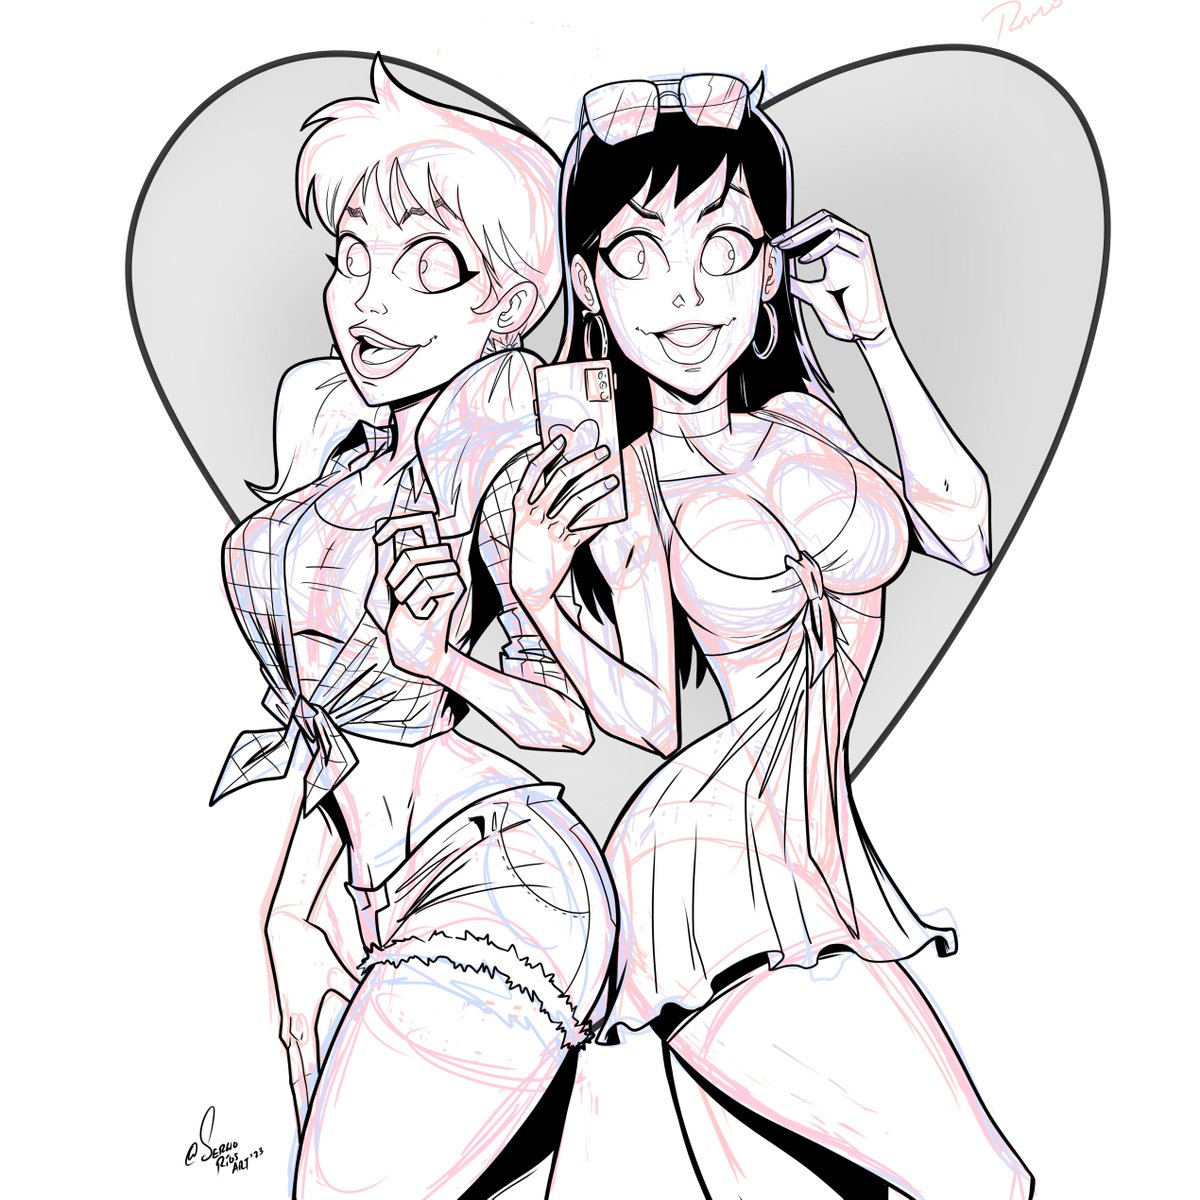 Betty and Veronica.
#Archie #archiecomics #bettyandveronica #riverdale #comics #ComicArt #comicartist #comicbooks